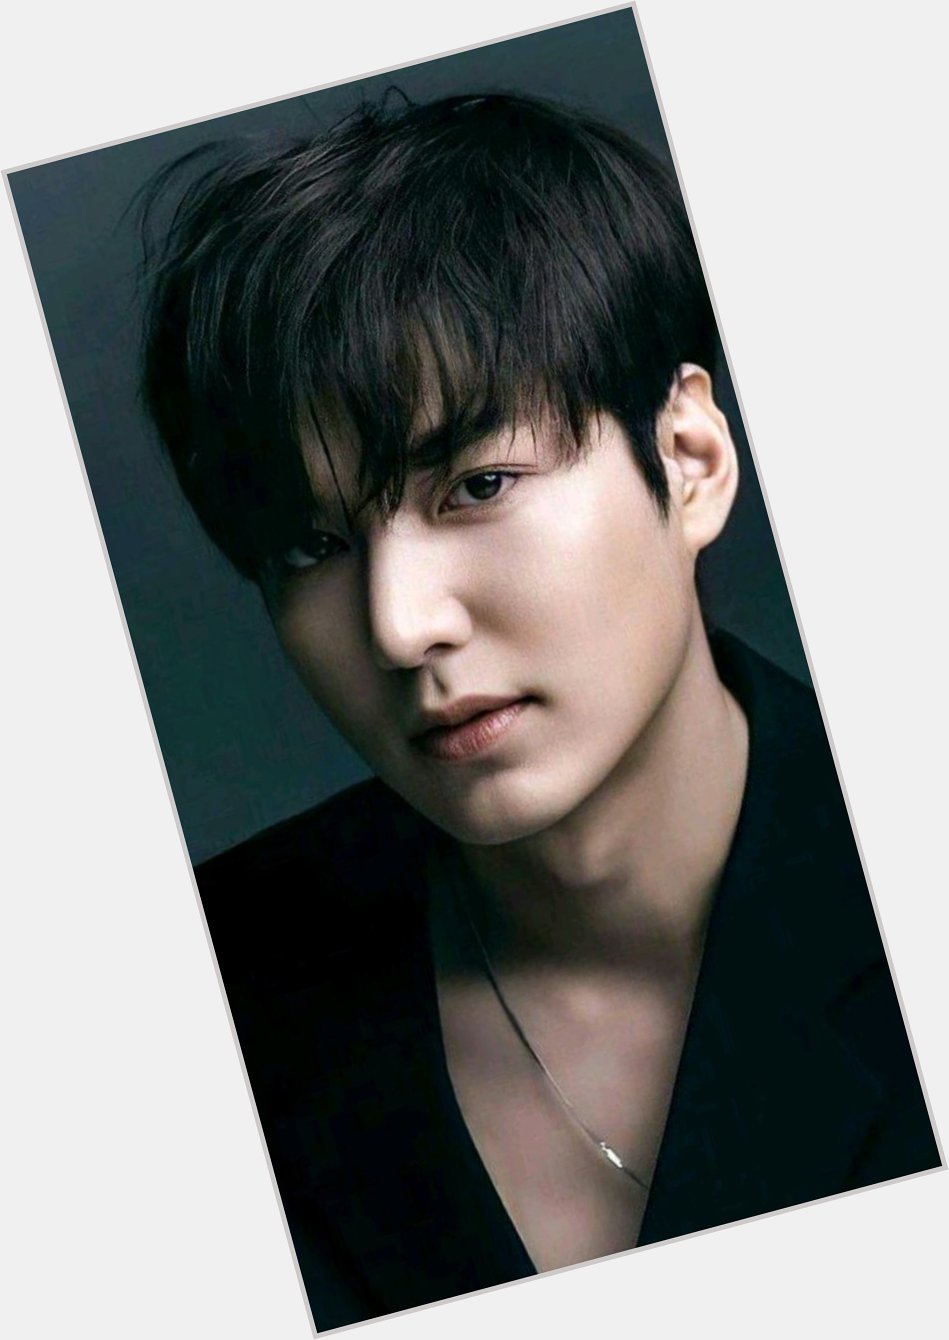  I hope your birthday turns out just like you awesome. Happy birthday Lee Min Ho God bless you!  